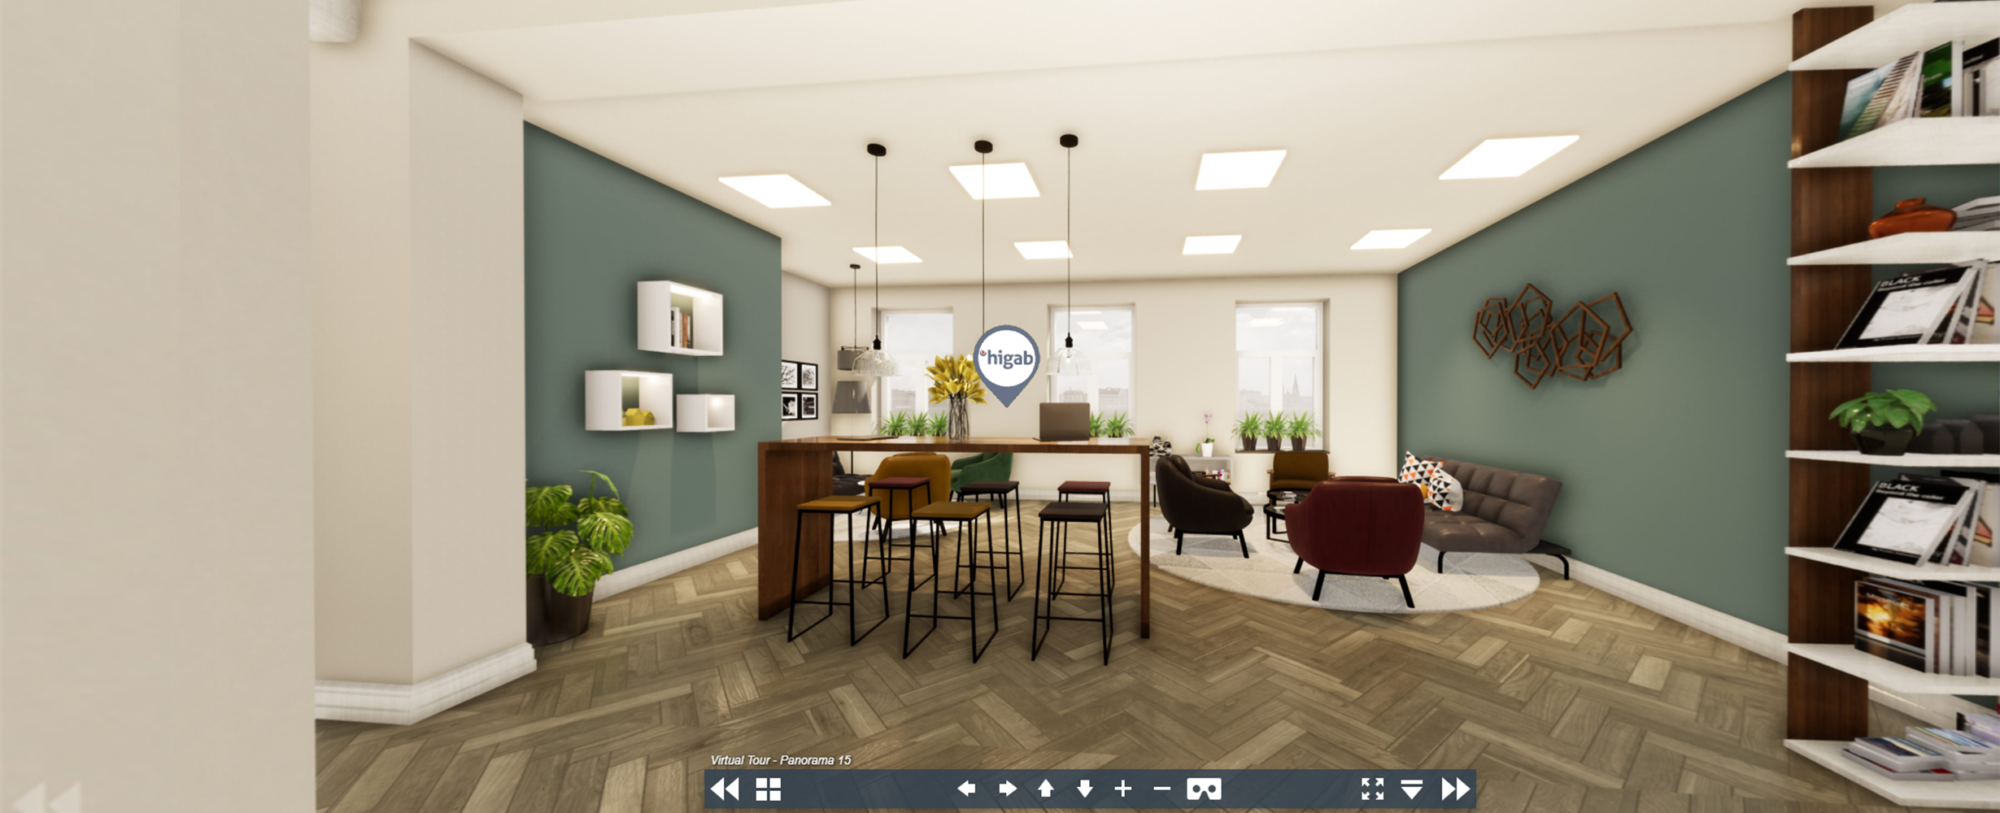 Office space visualization services from SWG